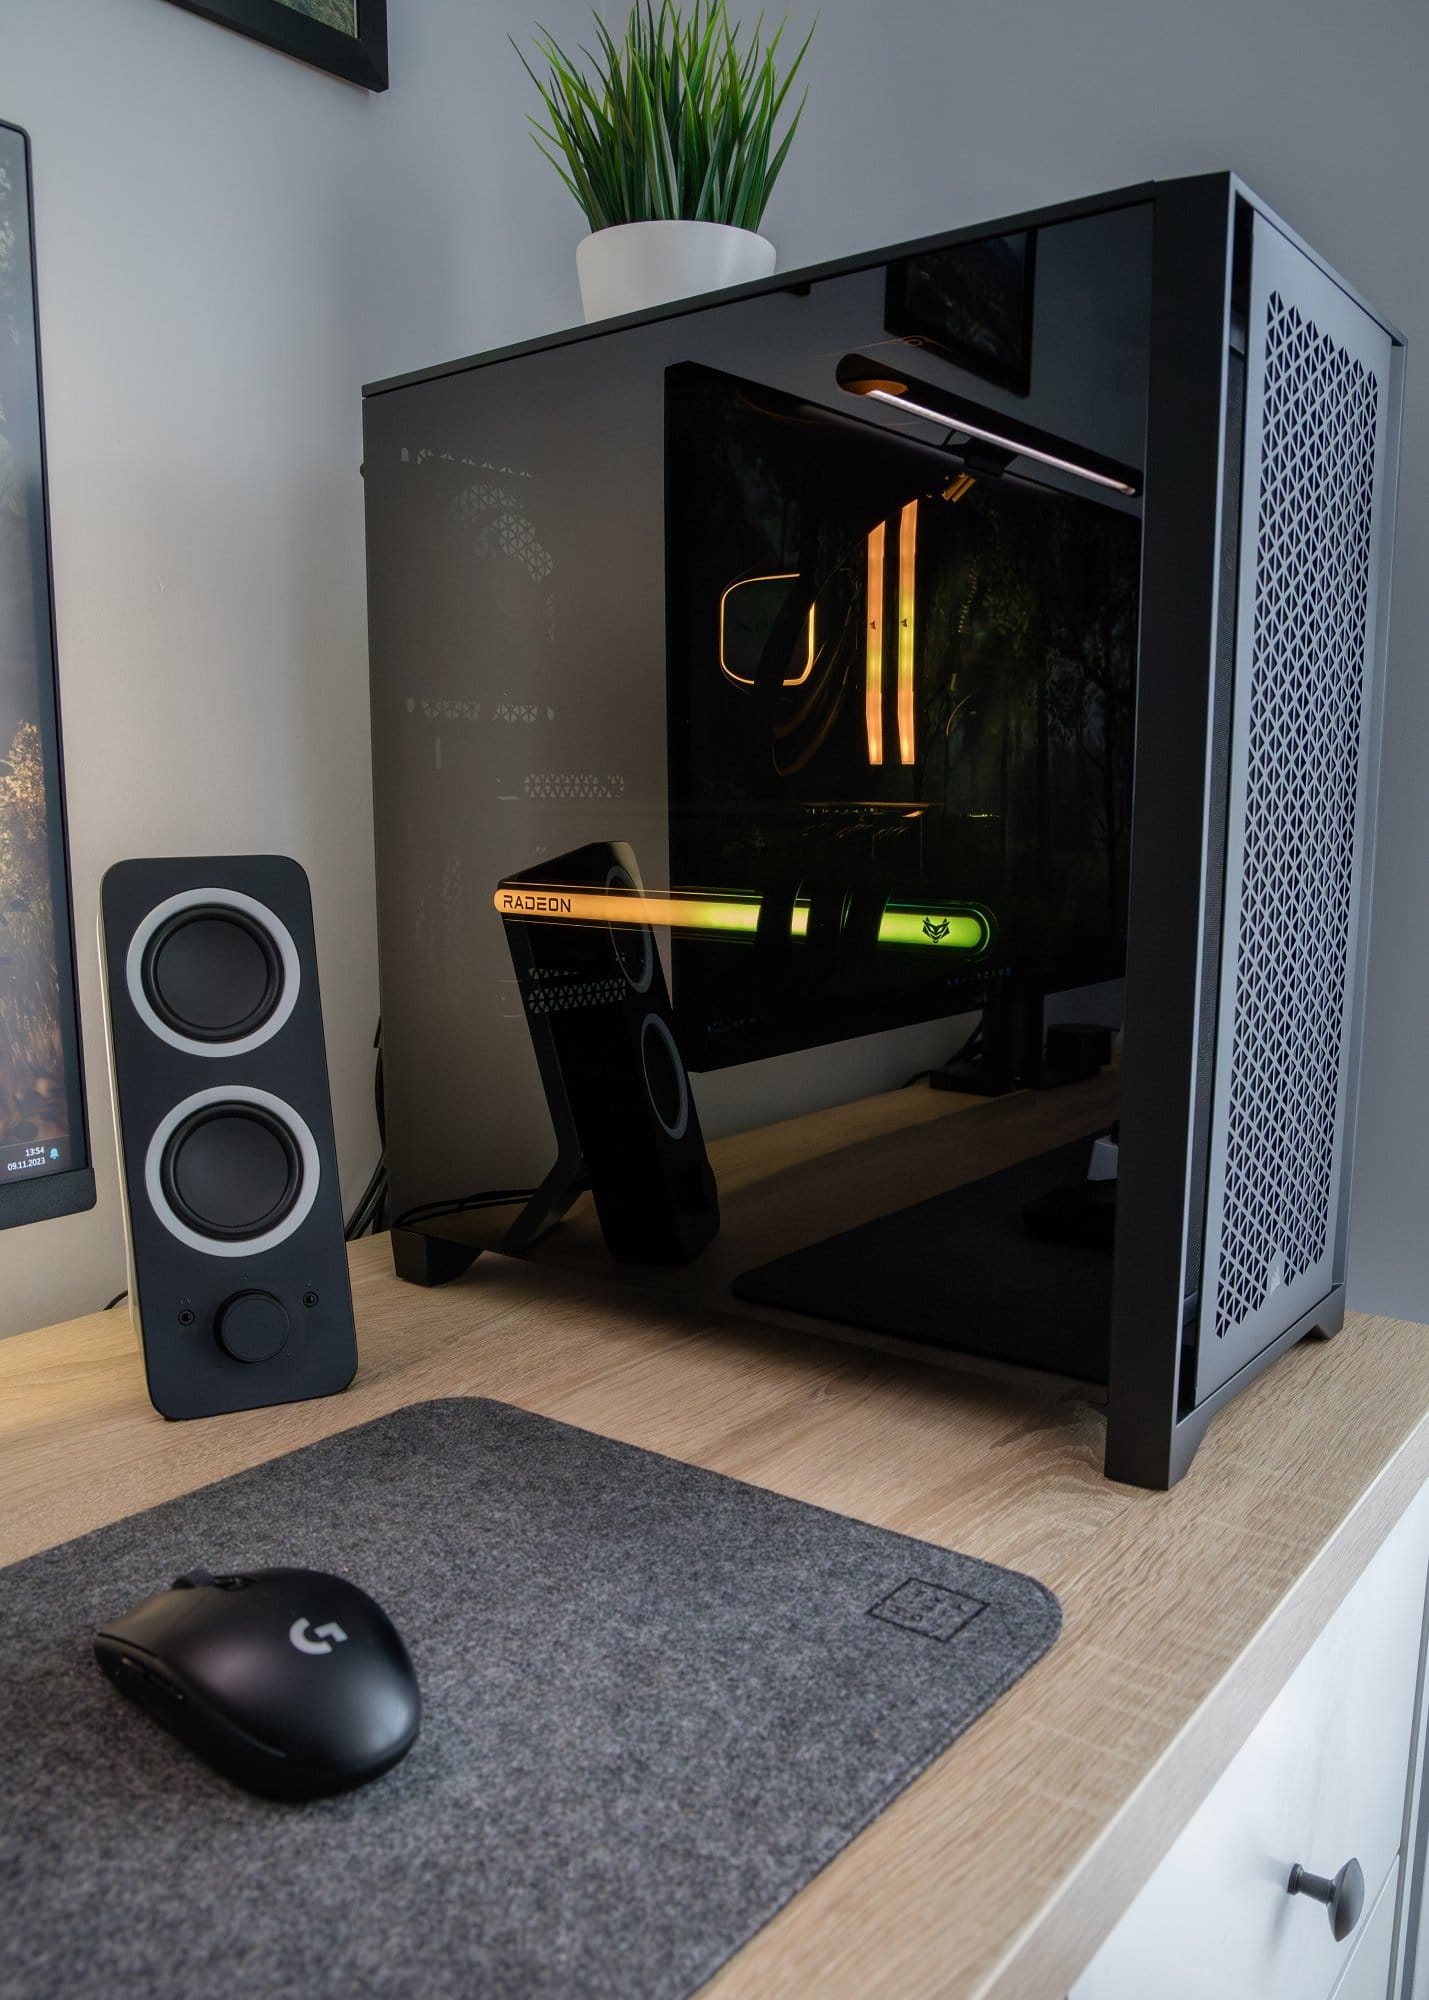 A close-up of a high-end custom-built gaming PC with a transparent side panel revealing internal components, illuminated by LED lights, placed on a desk beside a black stereo speaker, with a wireless mouse on a grey mat and a potted plant on top of the case